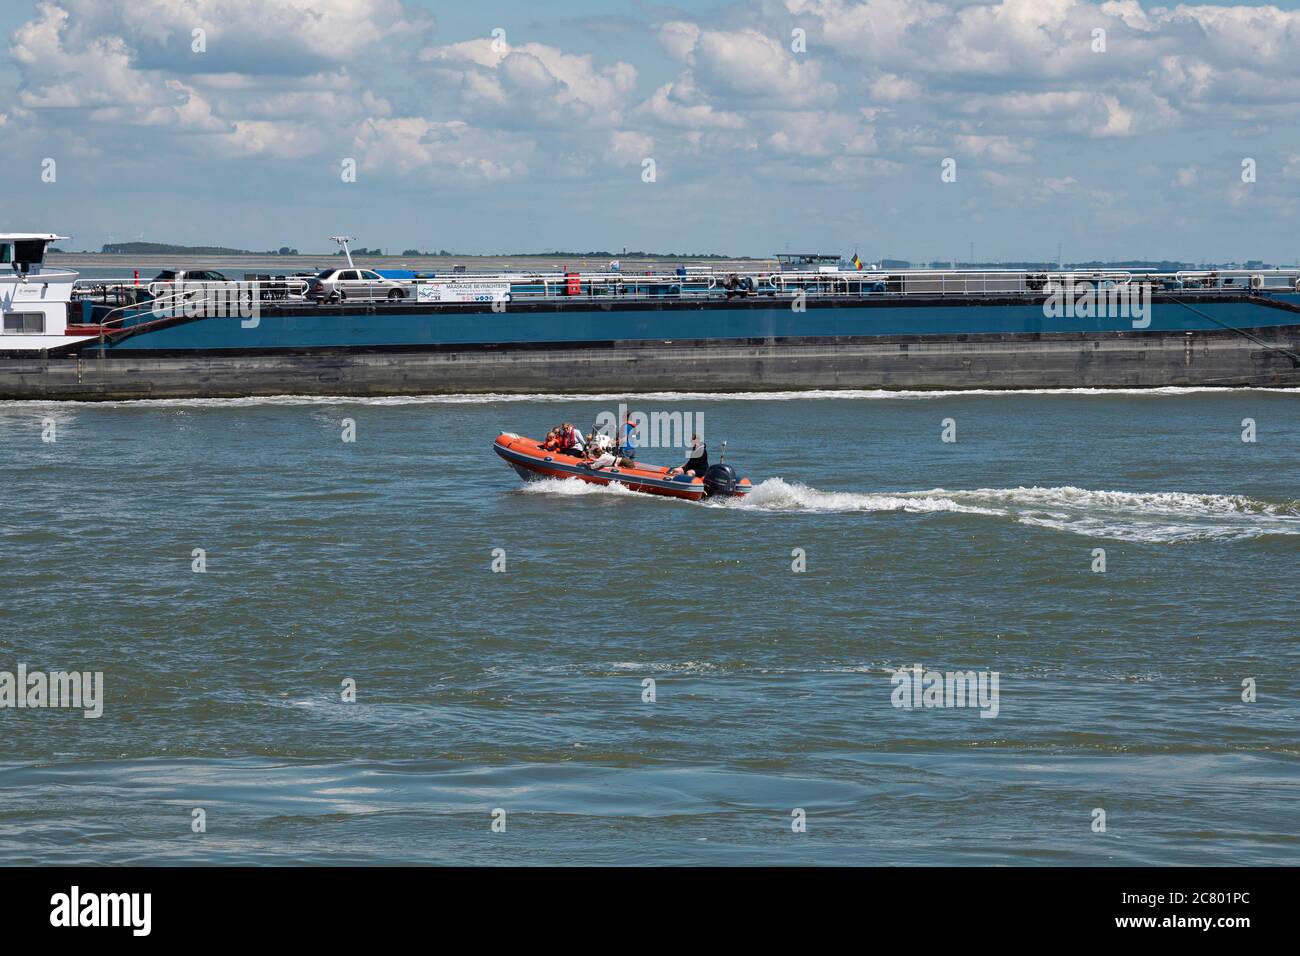 Terneuzen, Netherlands, July 12, 2020, An orange rubber motorboat with six people in it is sailing next to a large ship Stock Photo